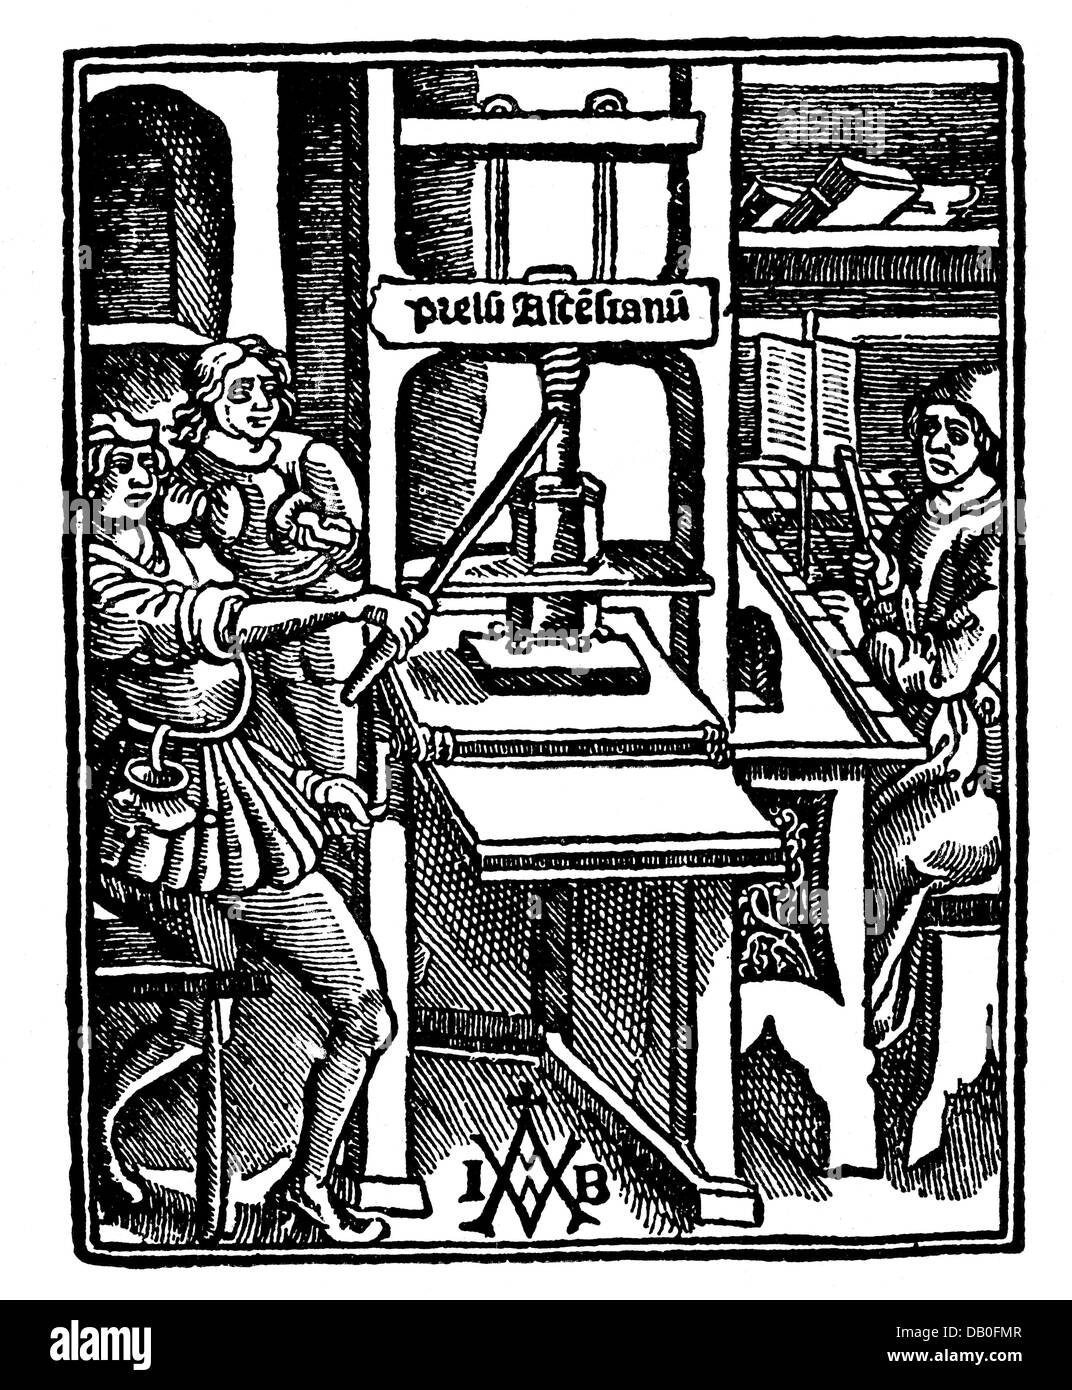 industry, print shop, printing press, printing sign of Josse Bade, Paris, circa 1520, Additional-Rights-Clearences-Not Available Stock Photo